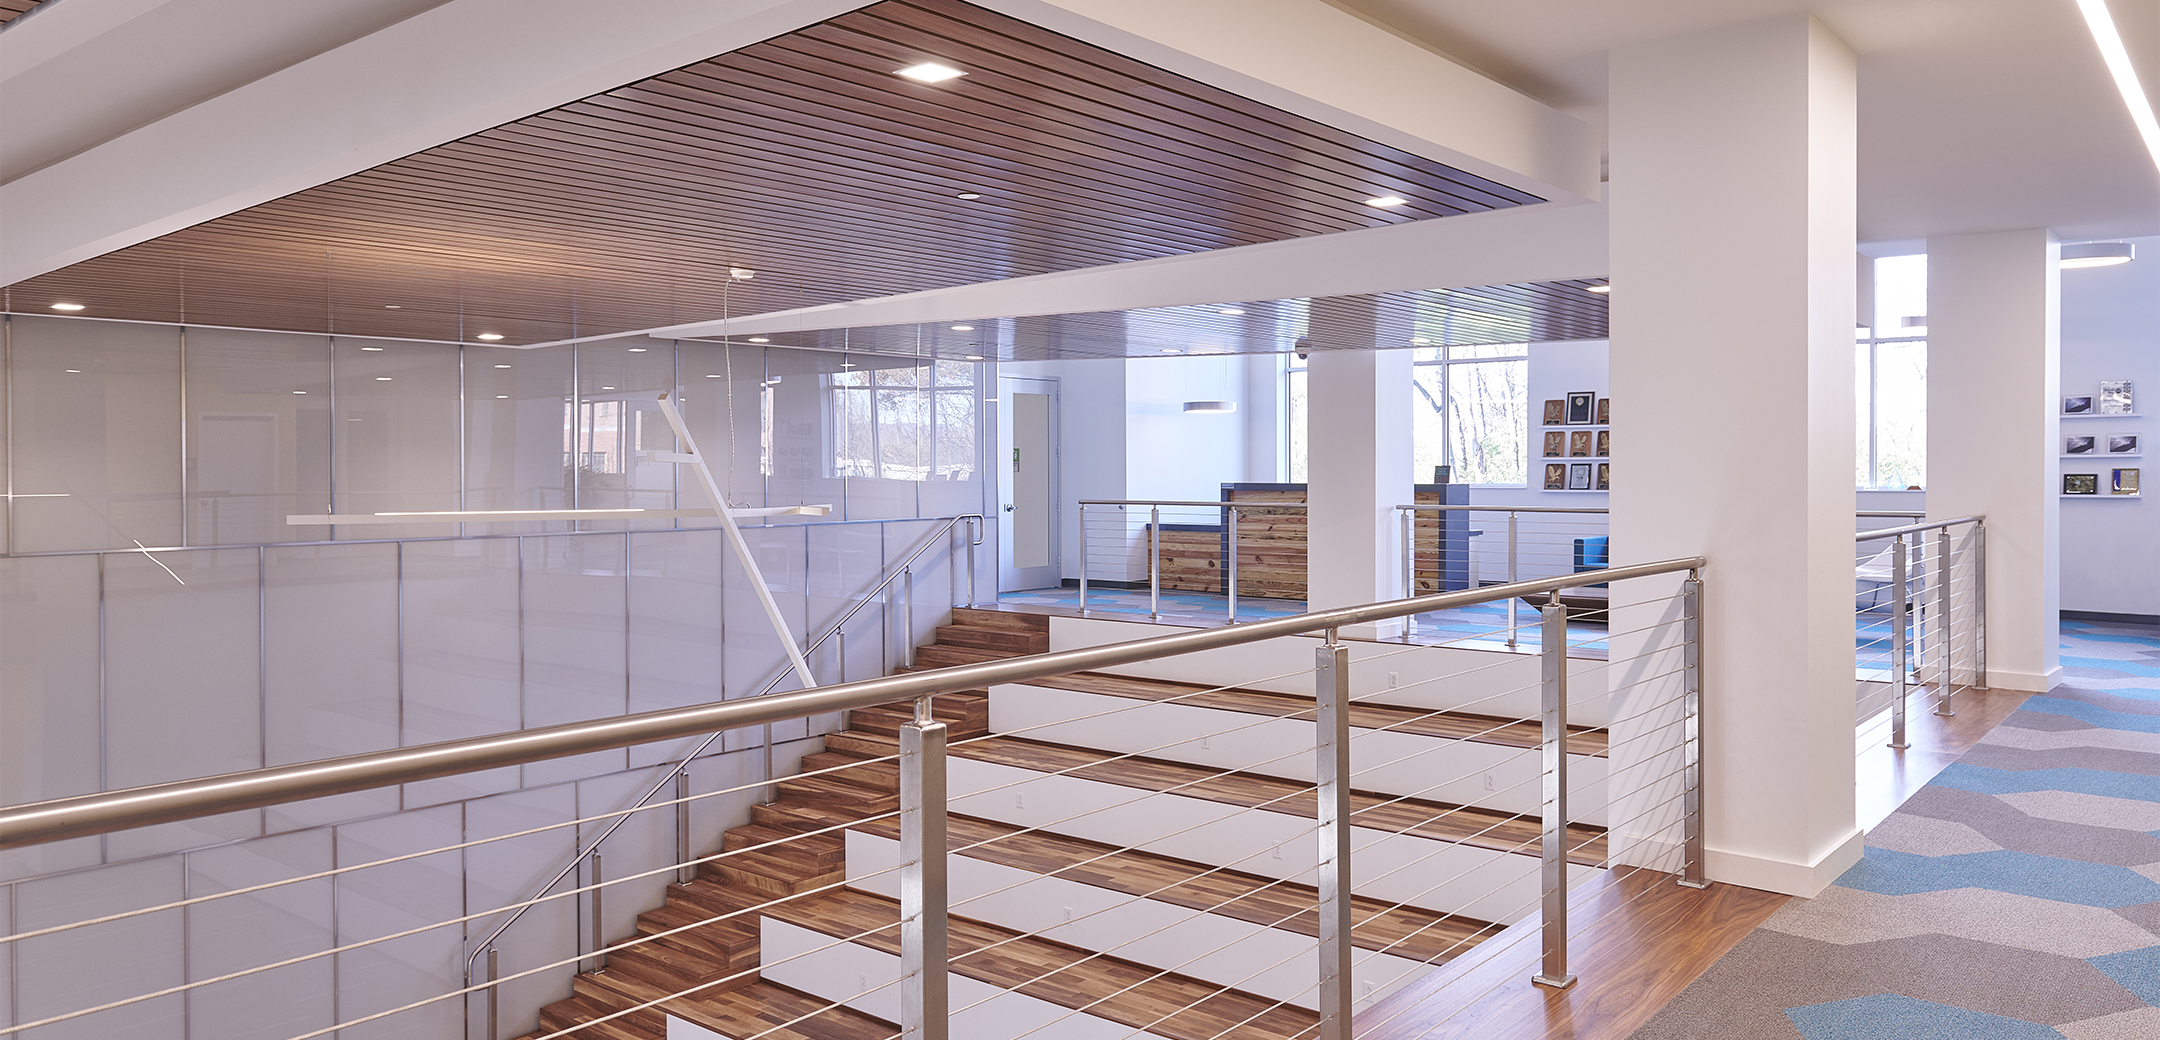 The interior space of UGI Energy Services featuring a staircase with wooden grandstand style seating connecting the lobby to the second floor.